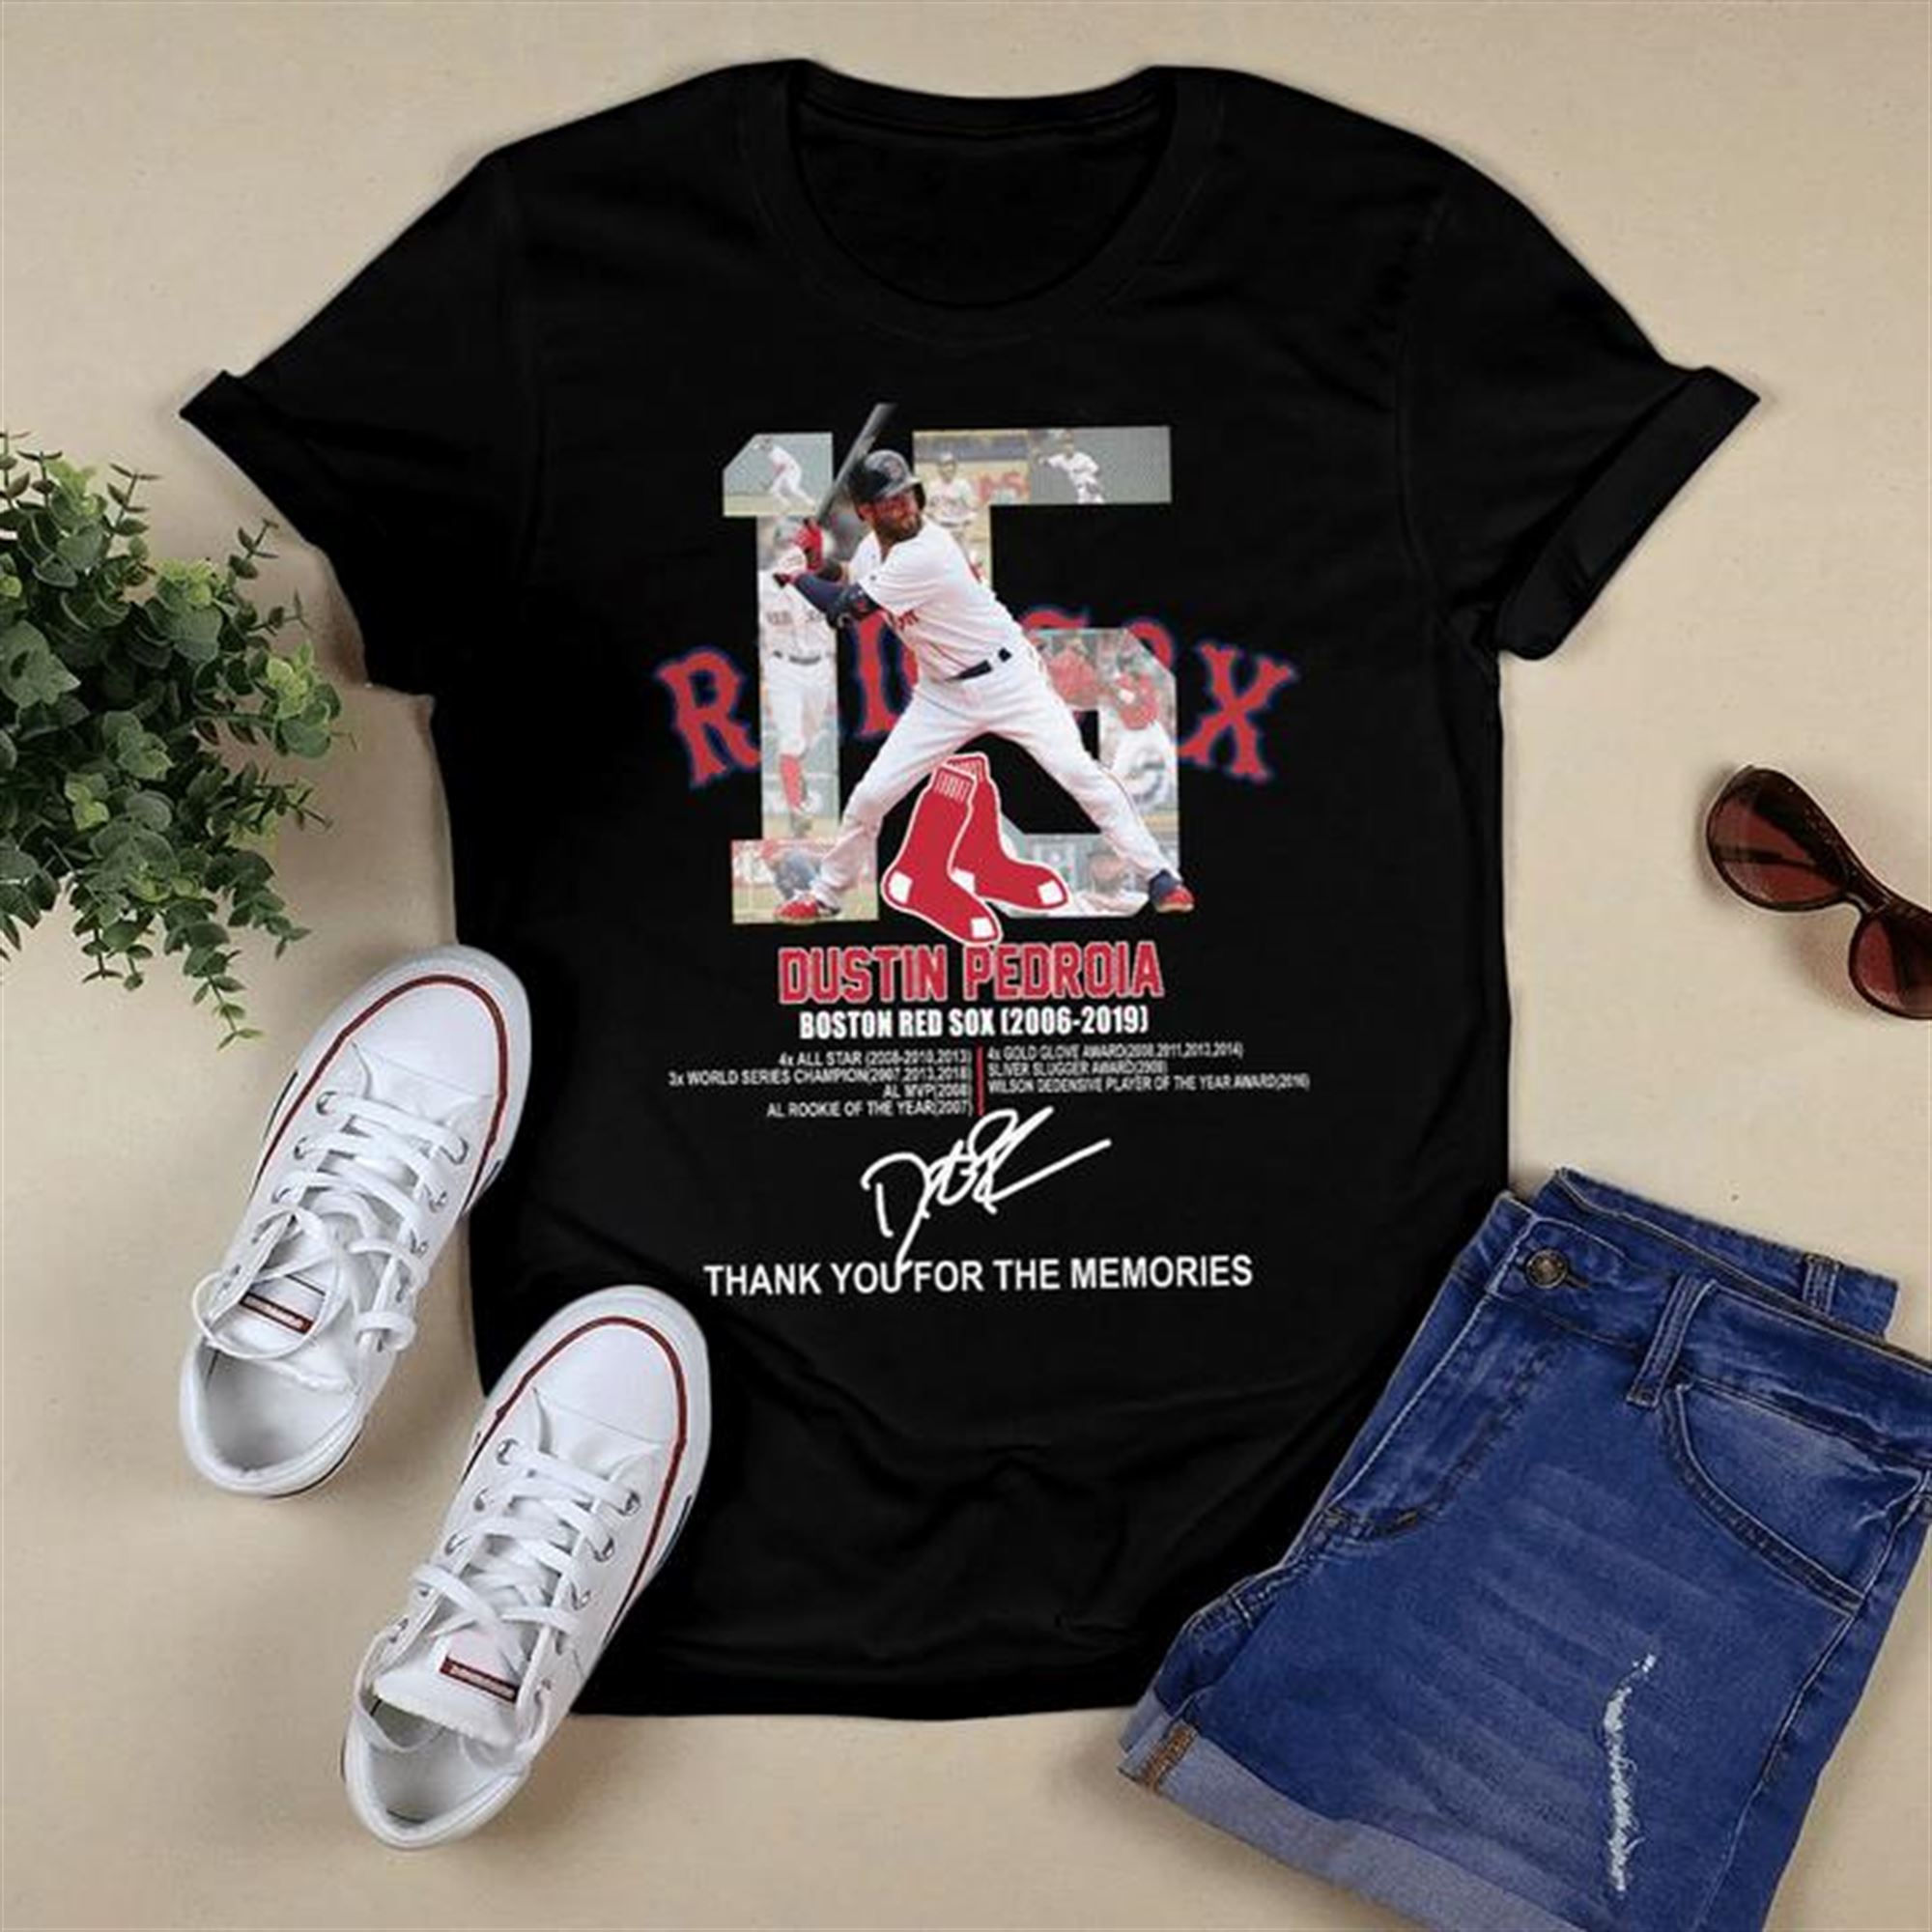 Dustin Pedroia Boston Red Sox Thank You For The Memories Signatures T-shirt Size Up To 5xl